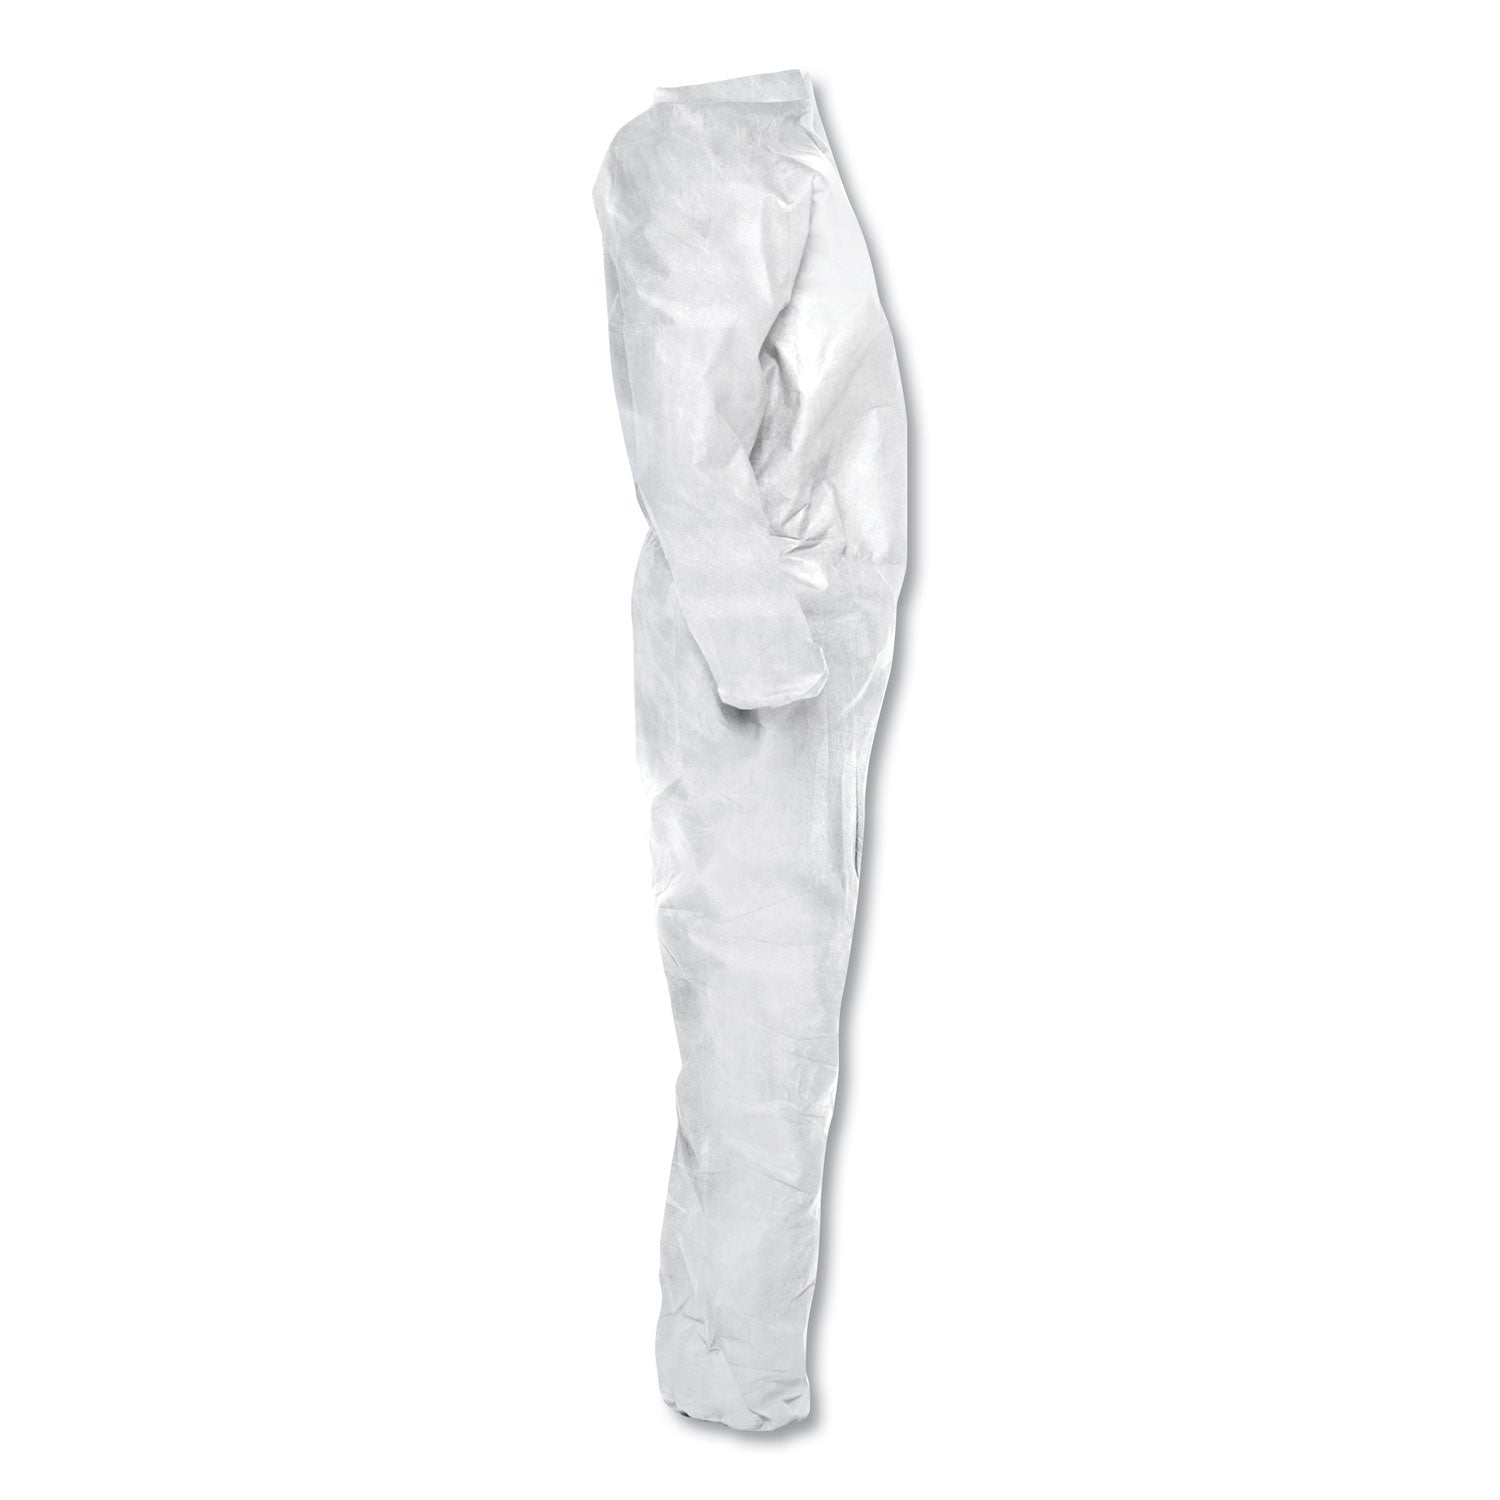 a20-breathable-particle-protection-coveralls-3x-large-white-20-carton_kcc49006 - 5